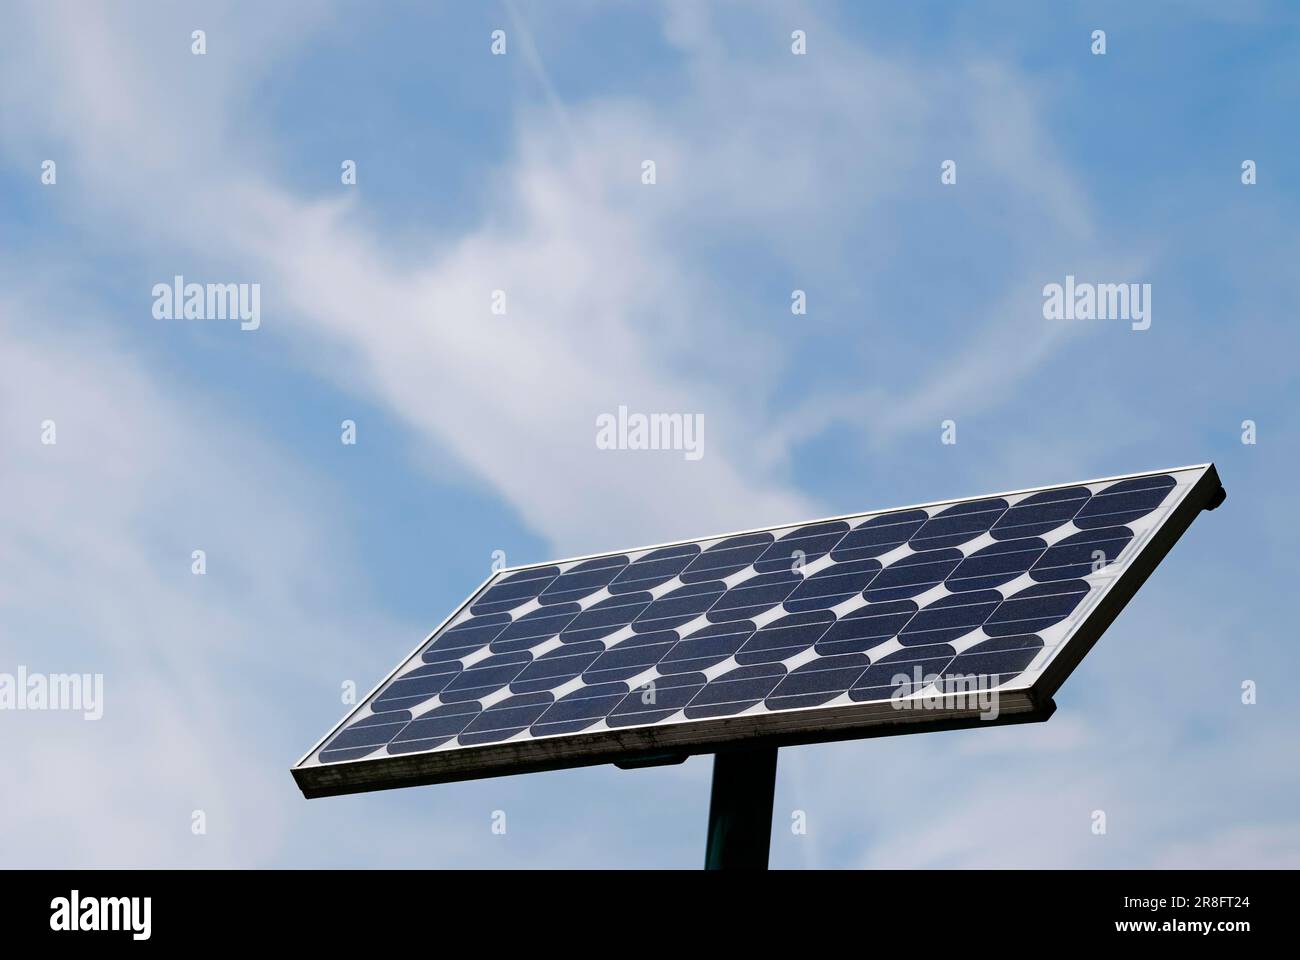 Electricity from a solar panel Stock Photo